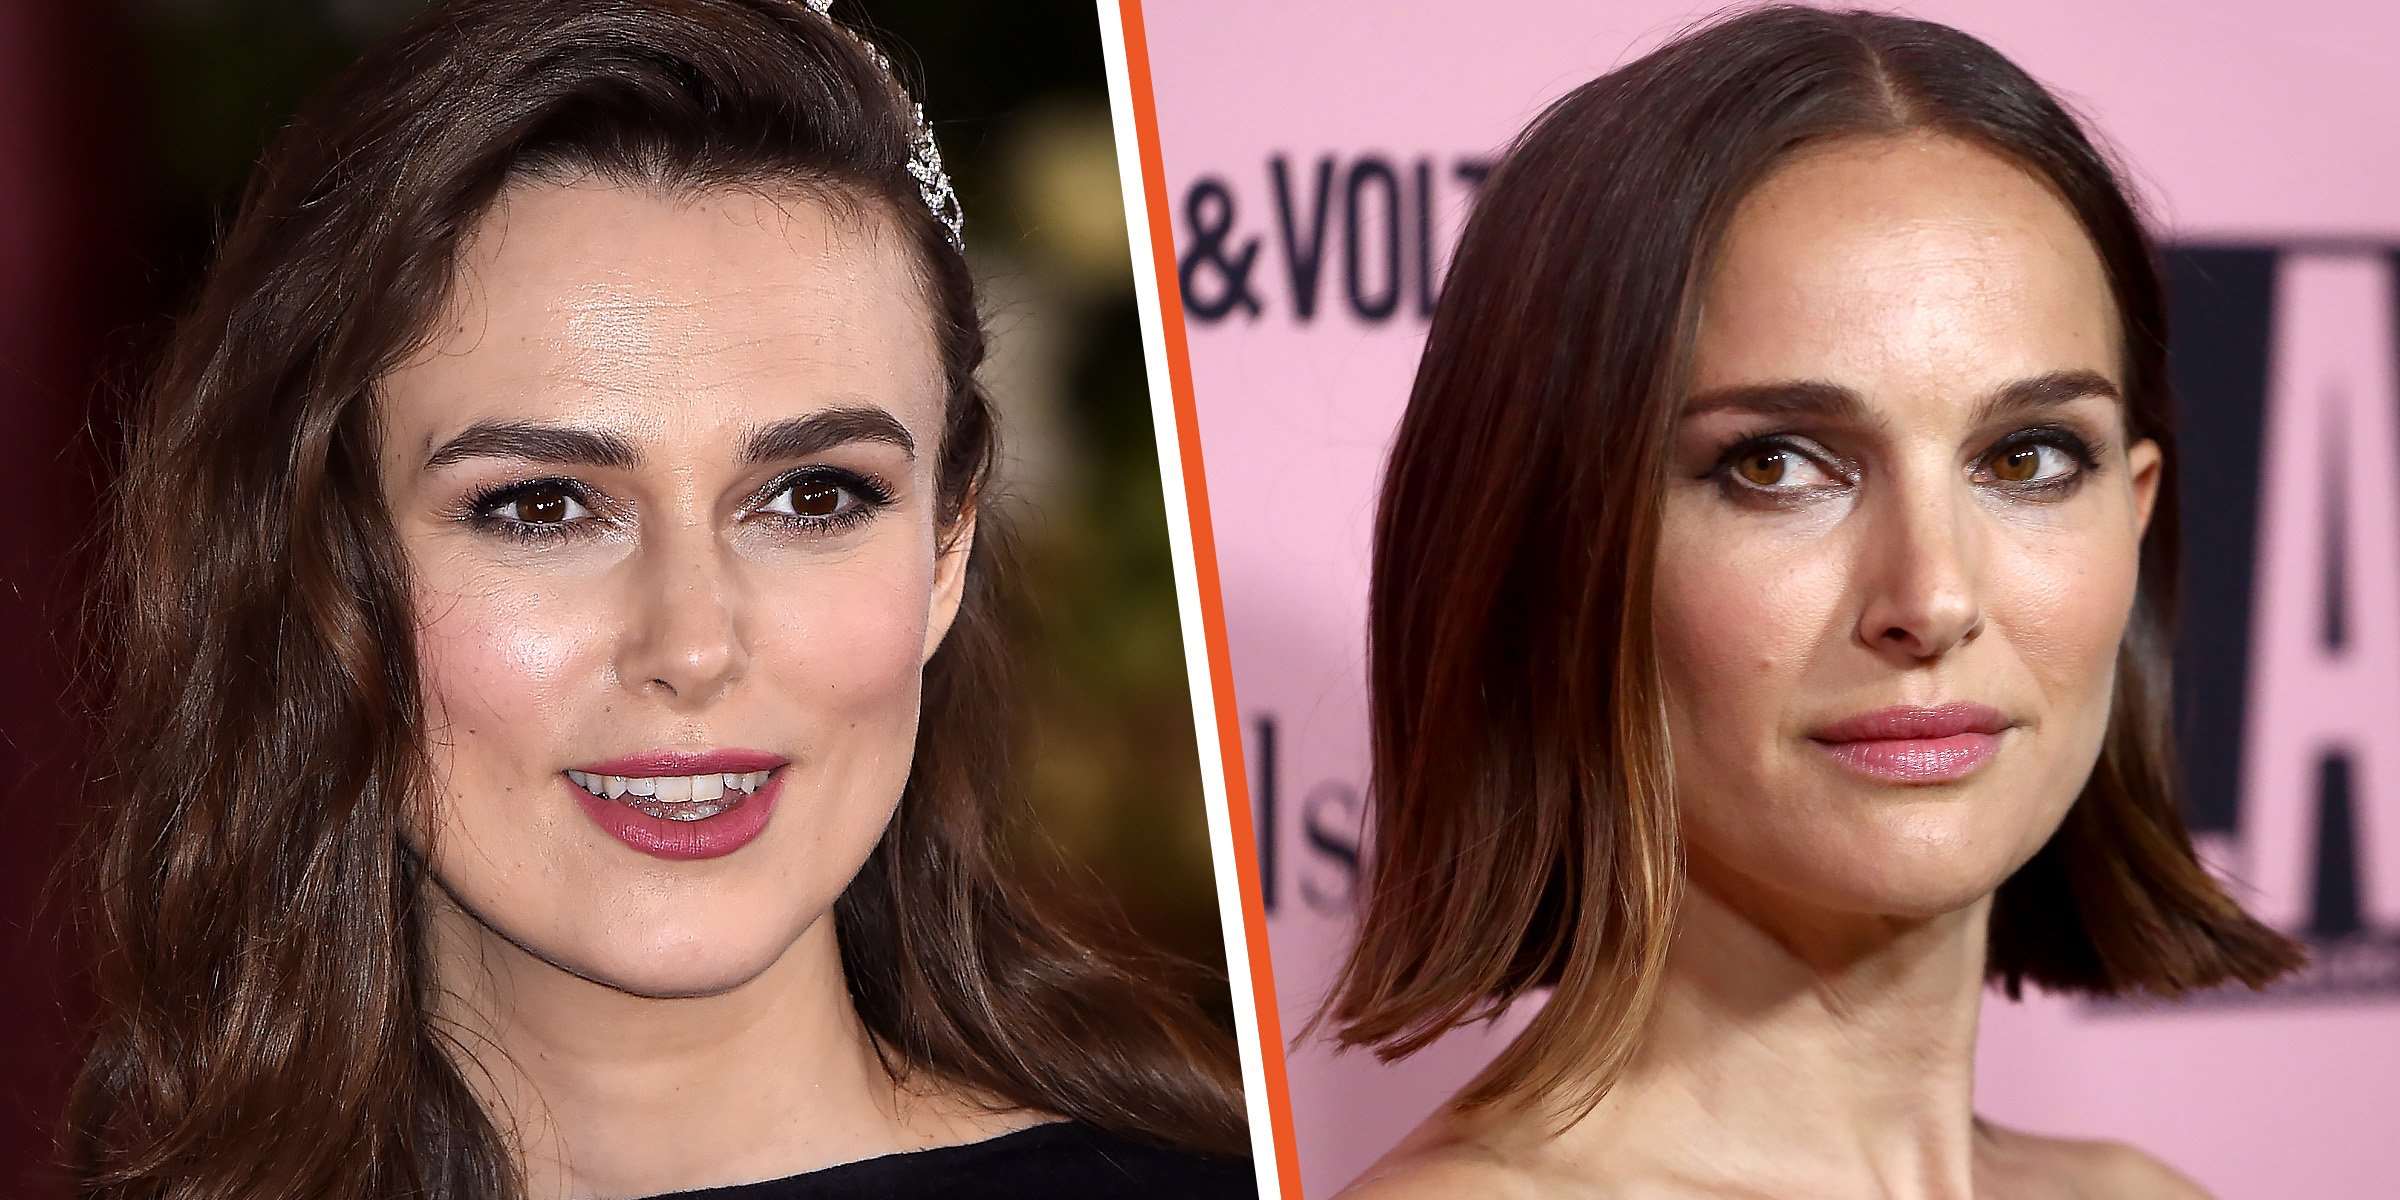 Surprising Connection: Natalie Portman And Keira Knightley's Unexpected Relationship Revealed!